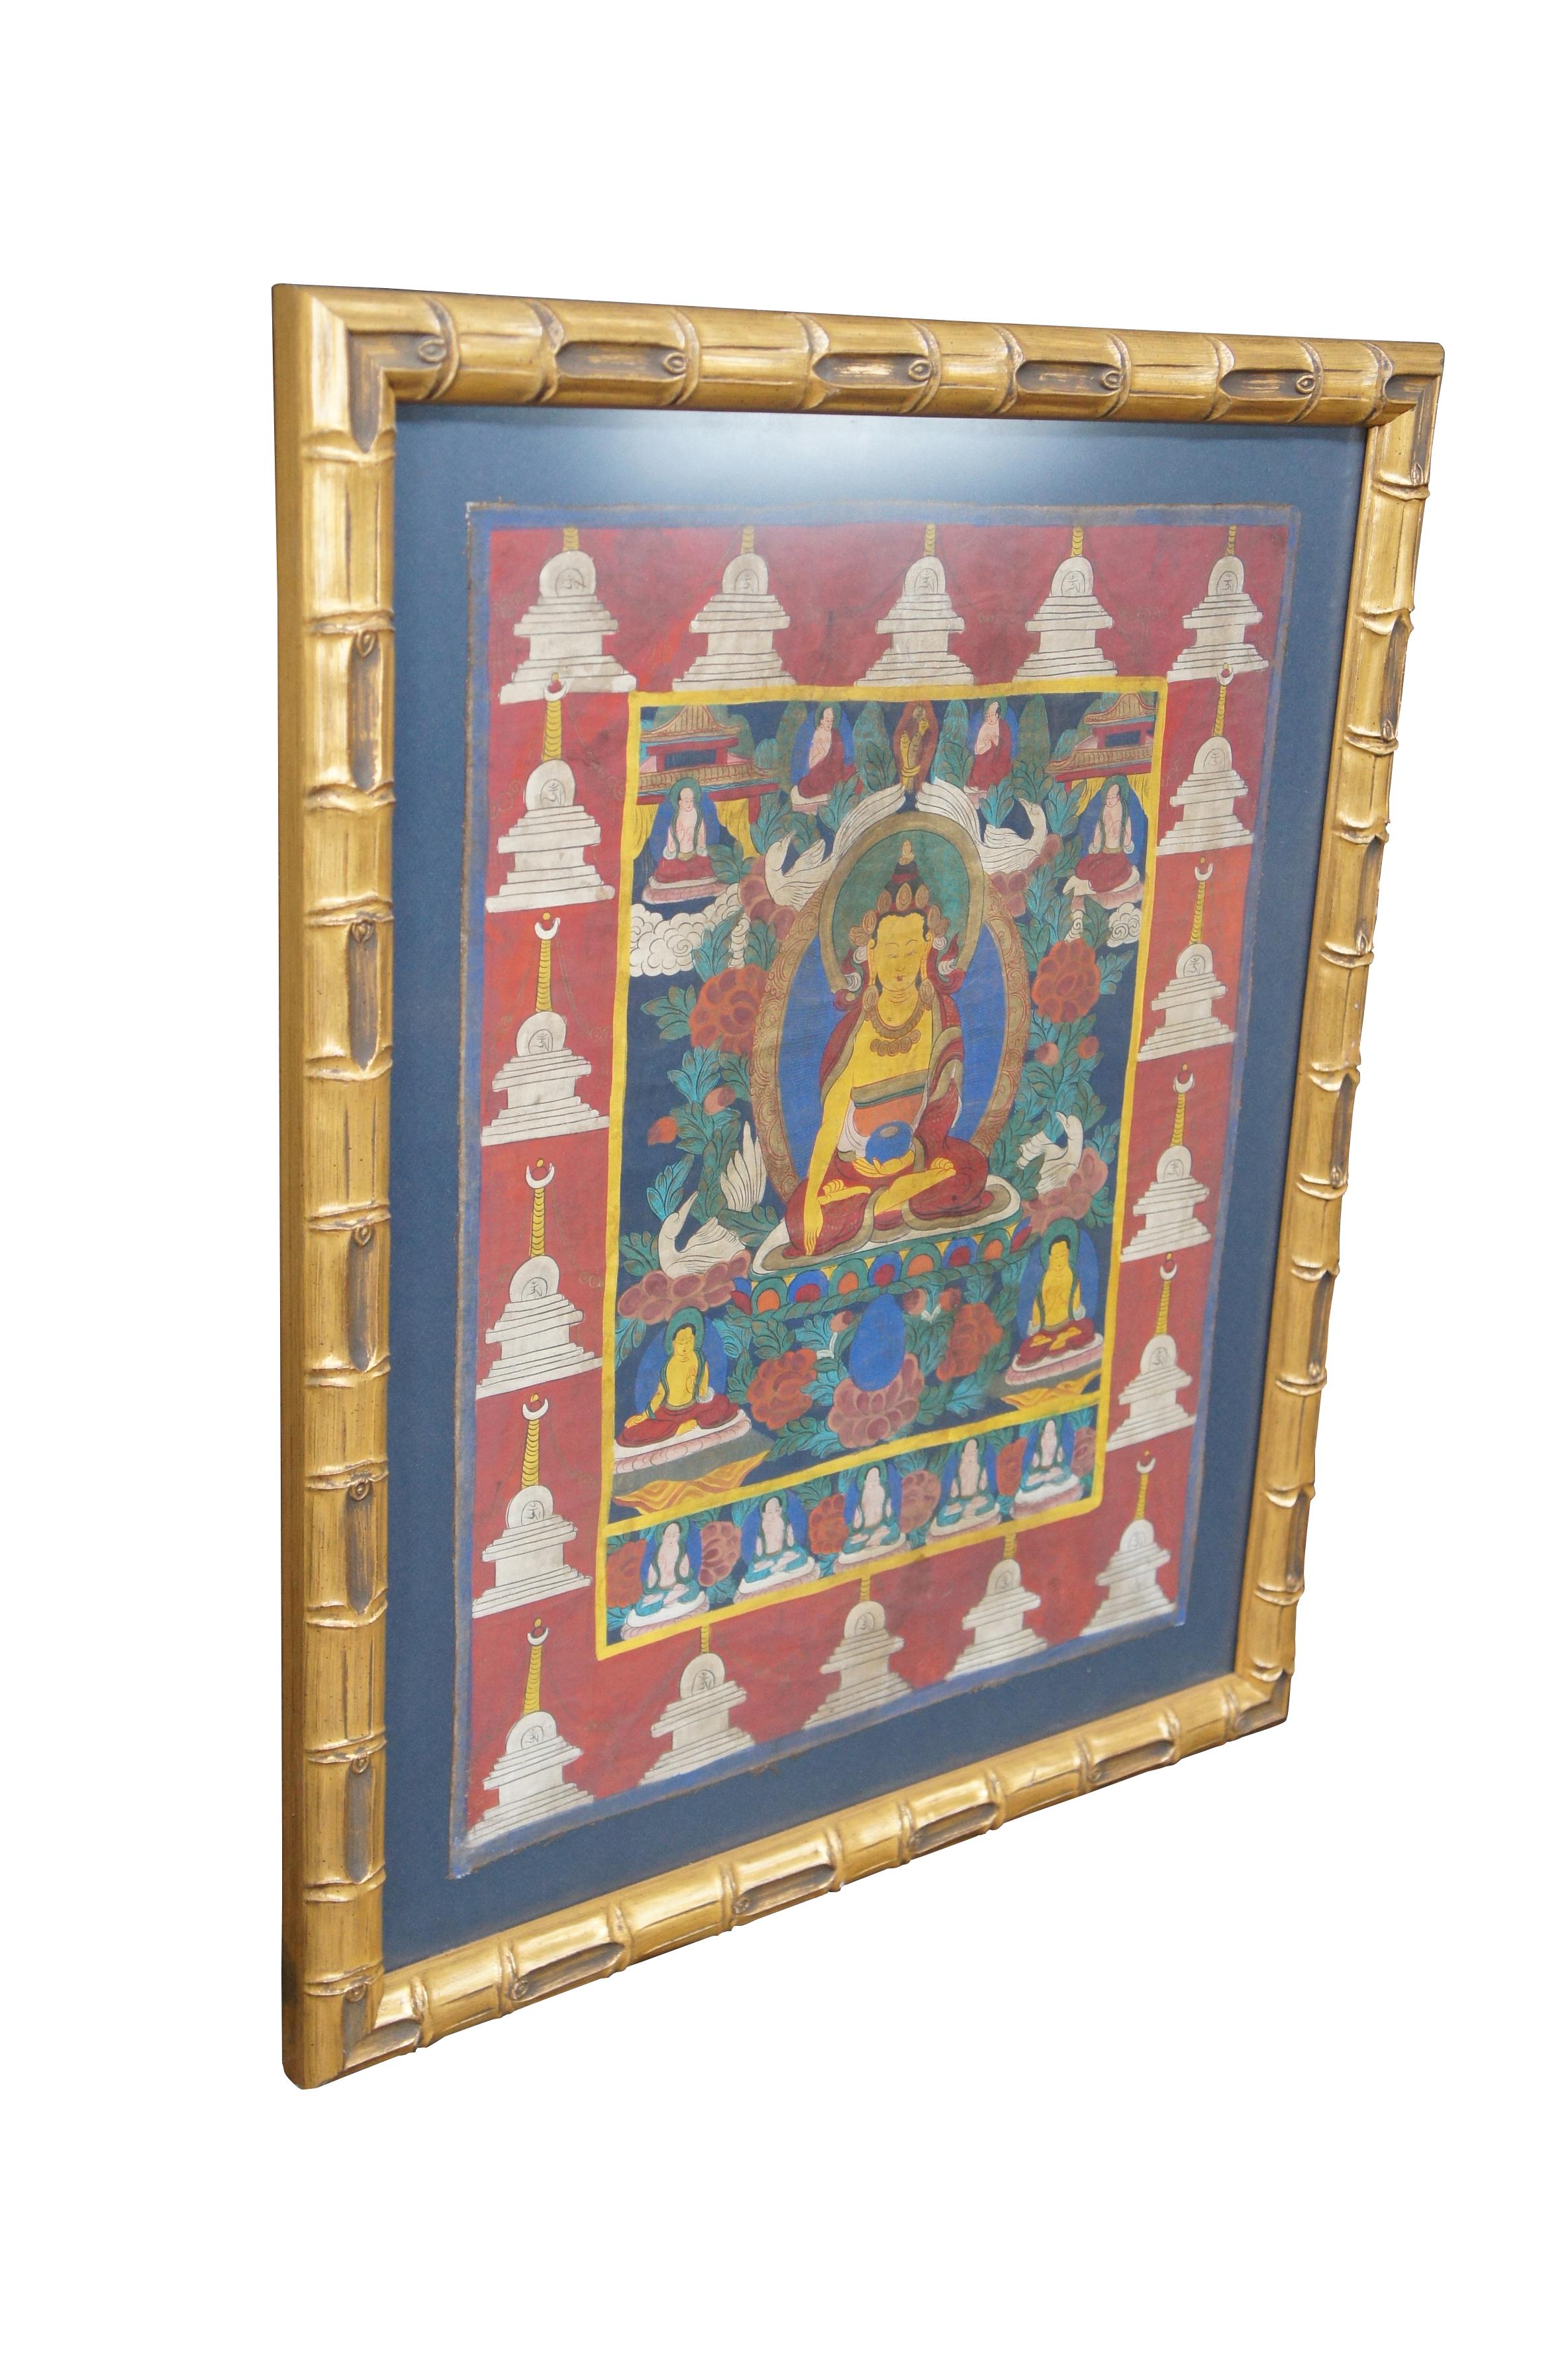 Vintage Tibetan Buddha Thangka Painting Swans Flowers Figures Faux Bamboo Frame In Good Condition For Sale In Dayton, OH